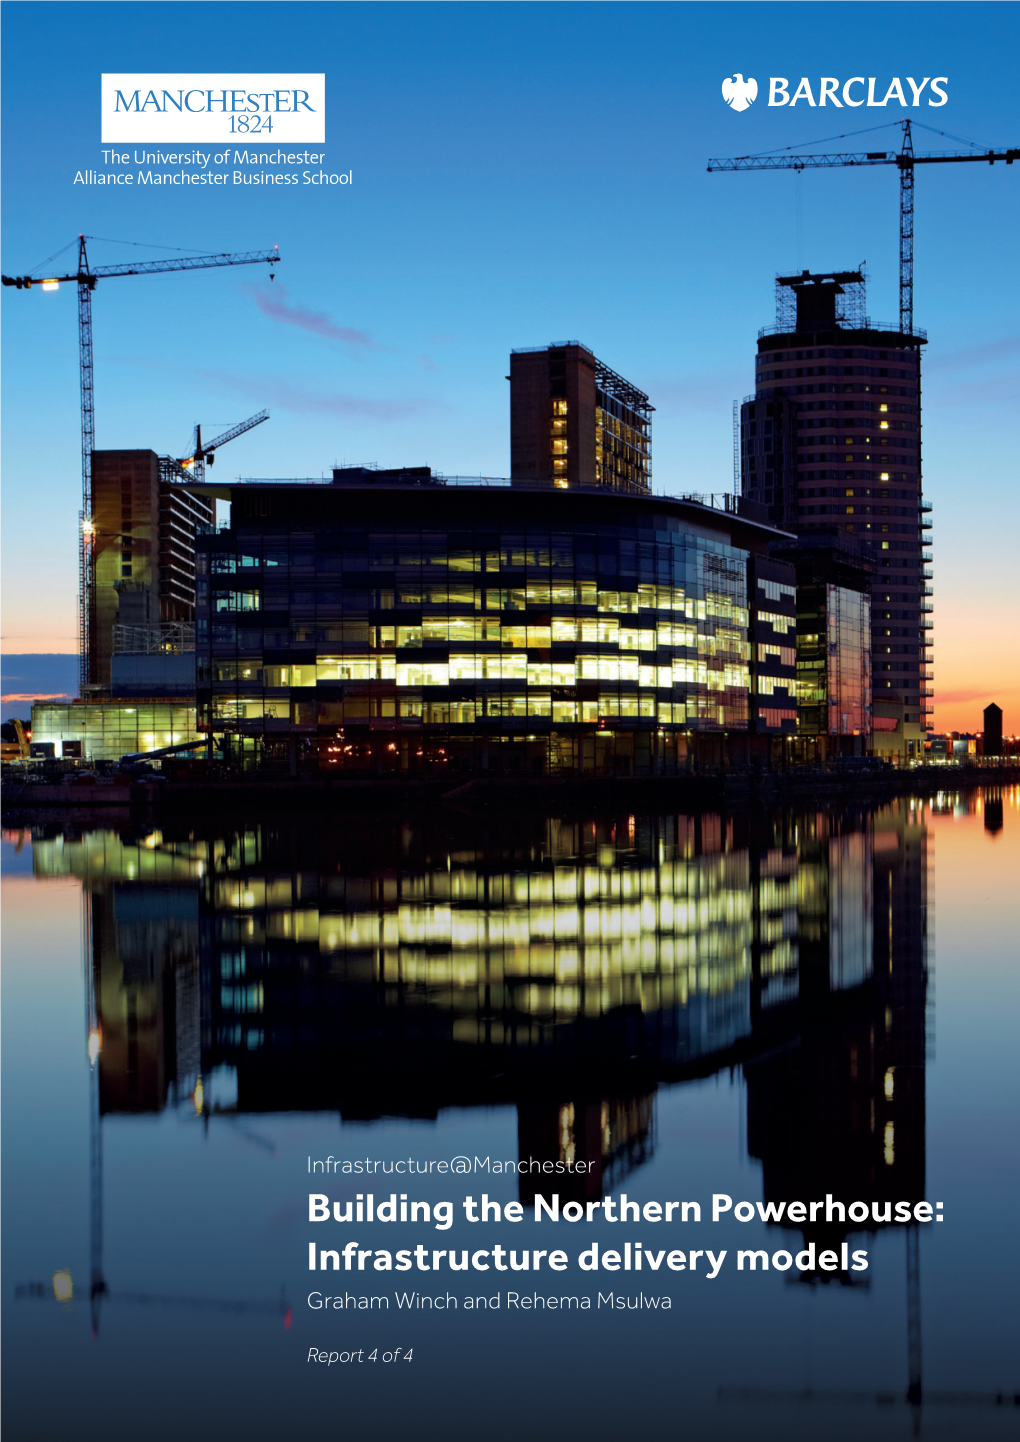 Building the Northern Powerhouse: Infrastructure Delivery Models Graham Winch and Rehema Msulwa